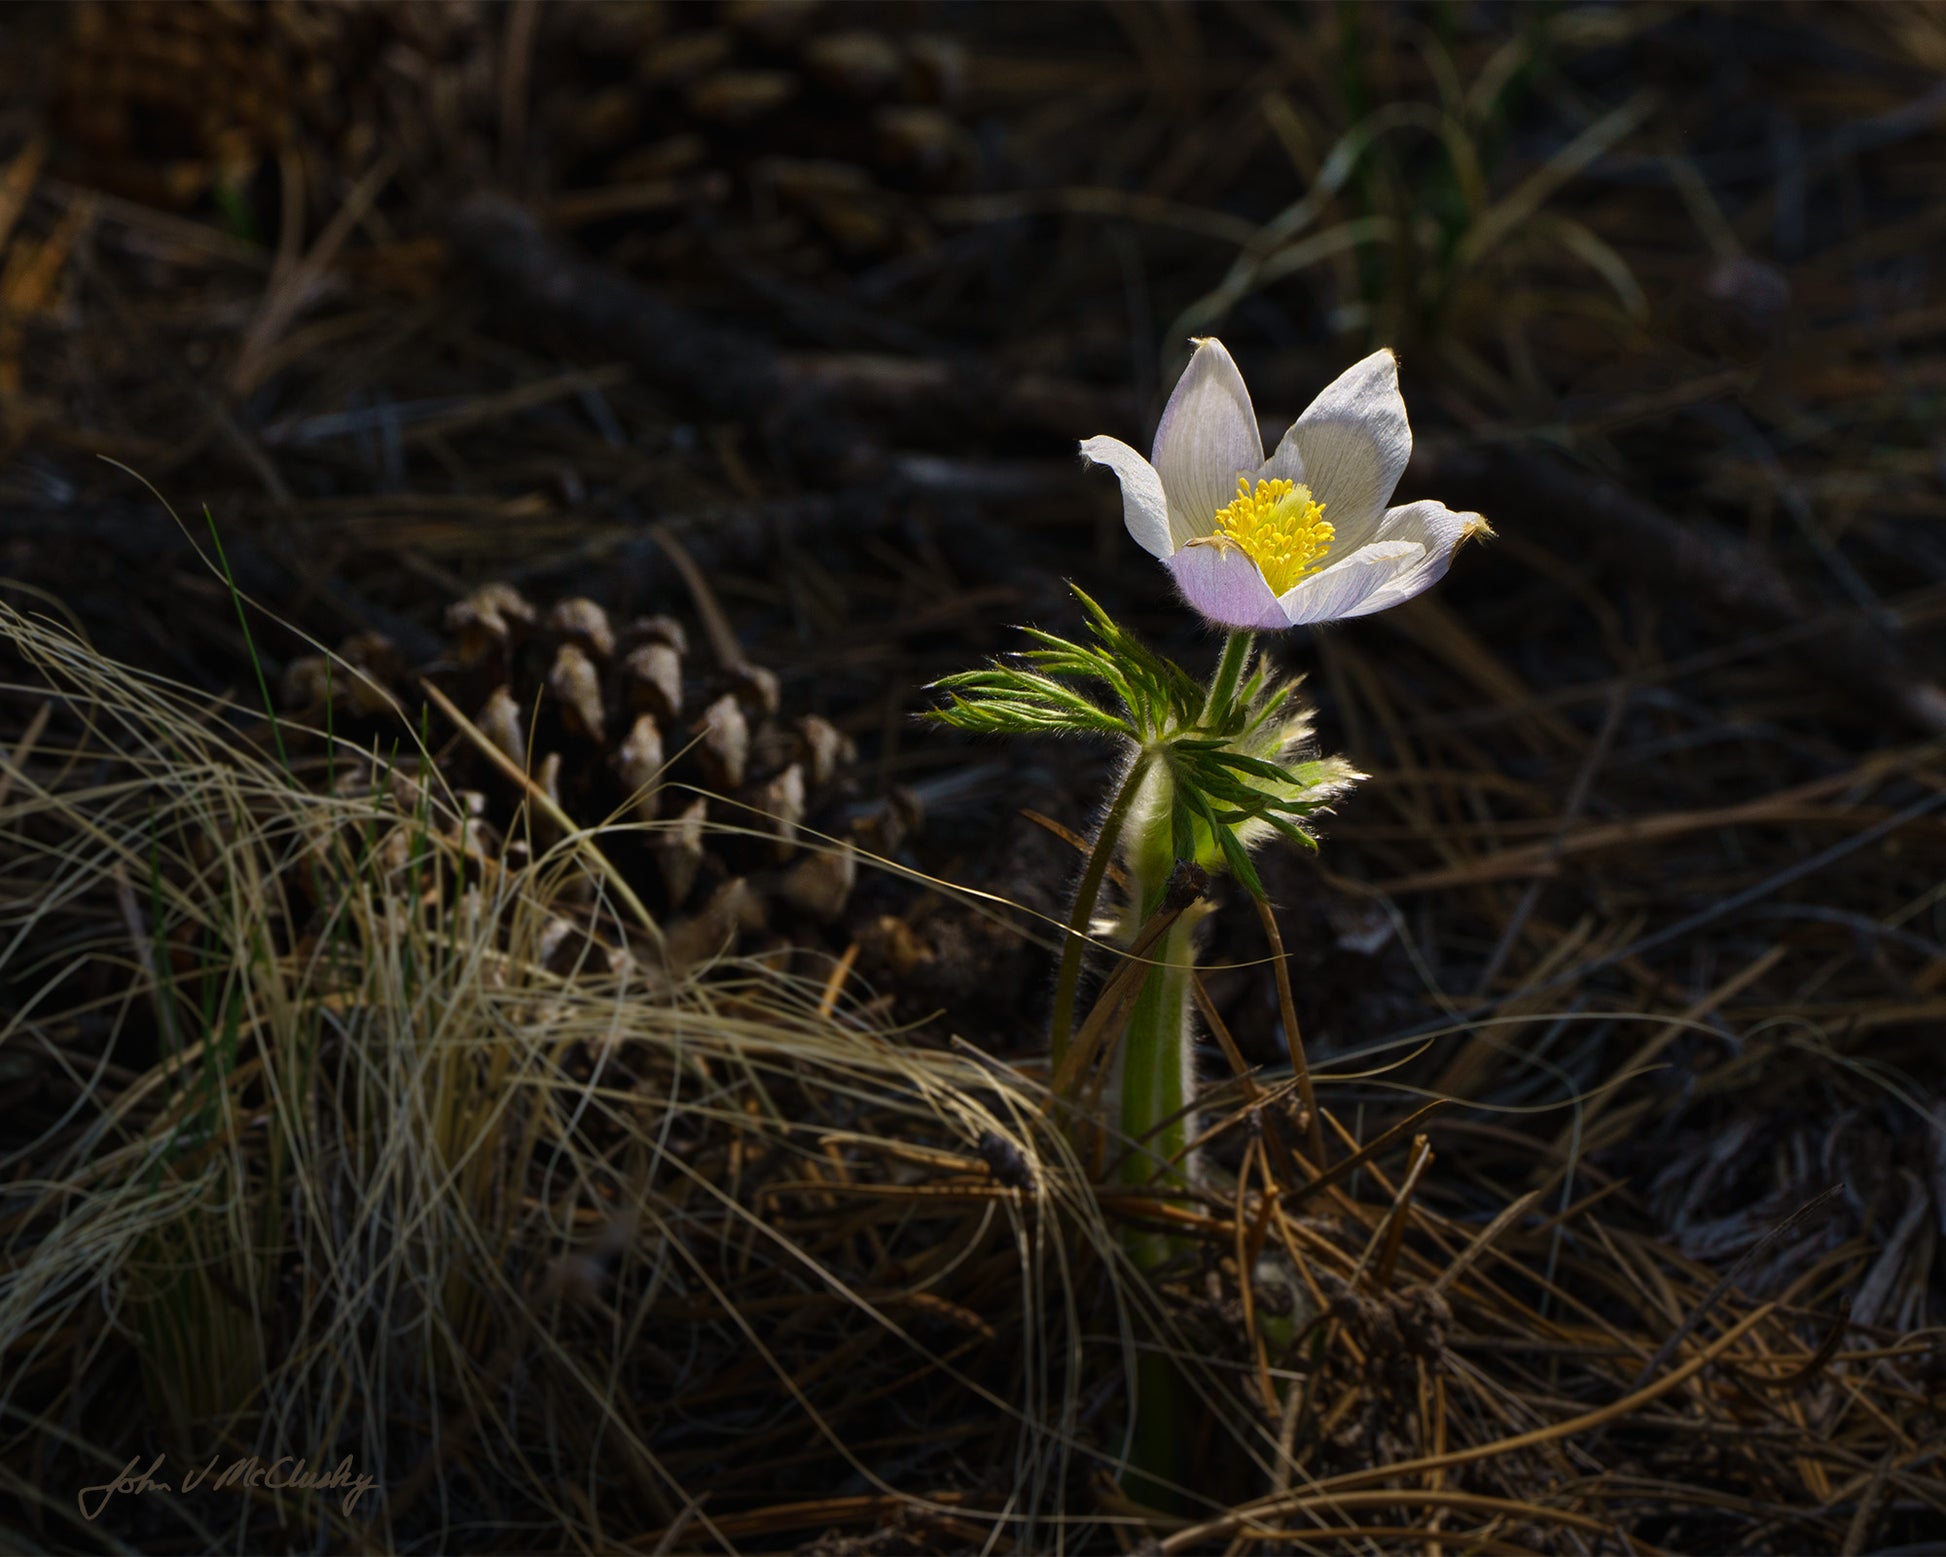 The sun spotlights a solitary pasqueflower amid pinecones and pine needles in this nature photography image by McClusky Nature Photography.